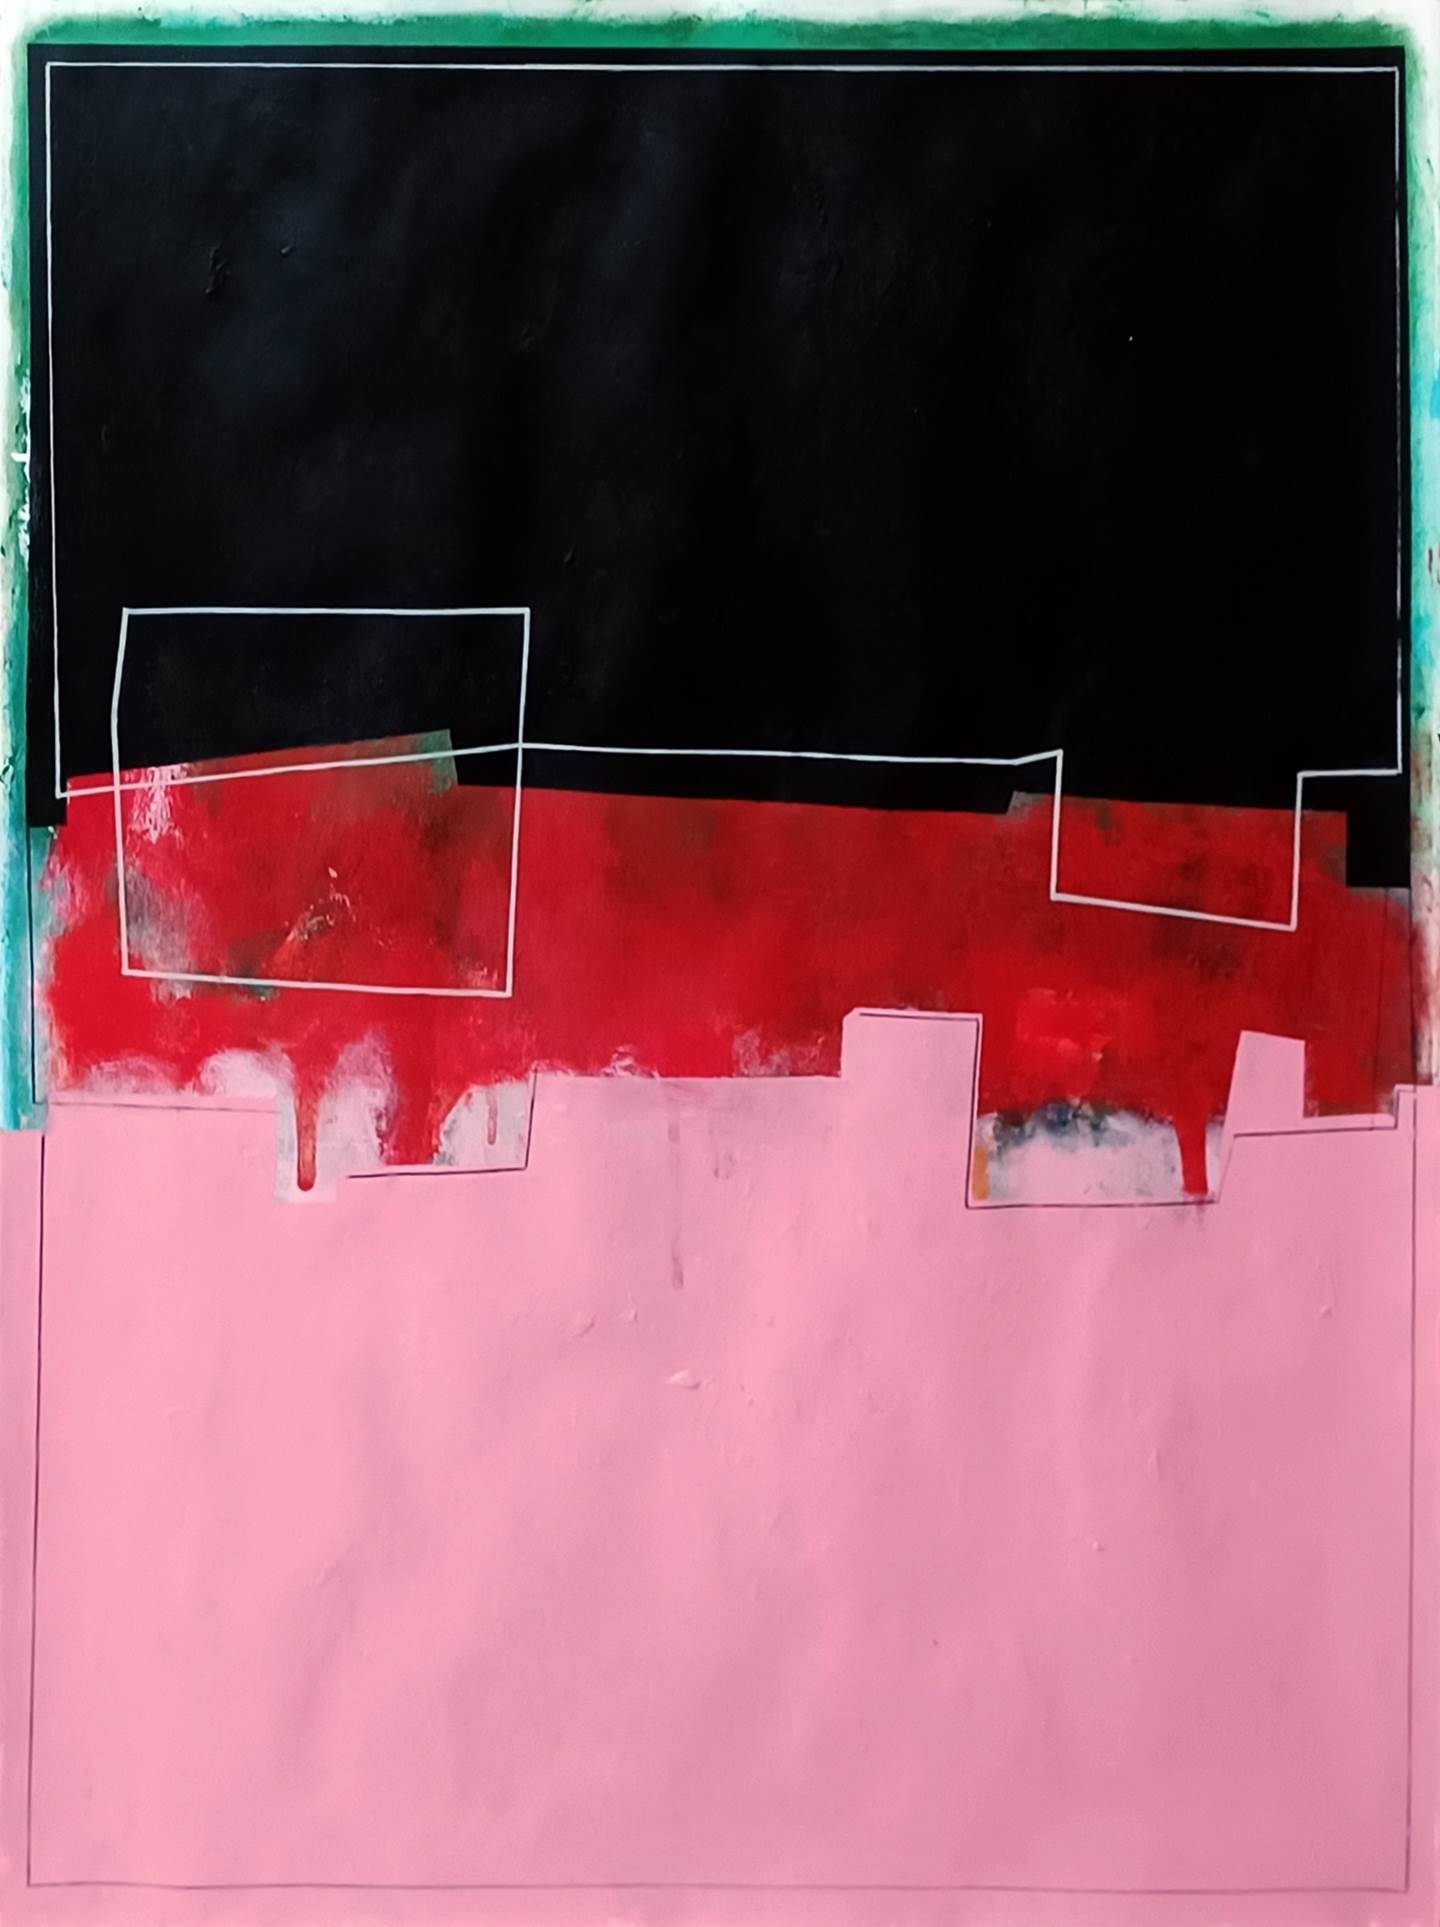 Black, red and pink composition, original Portrait Acrylic Painting by Luis Medina